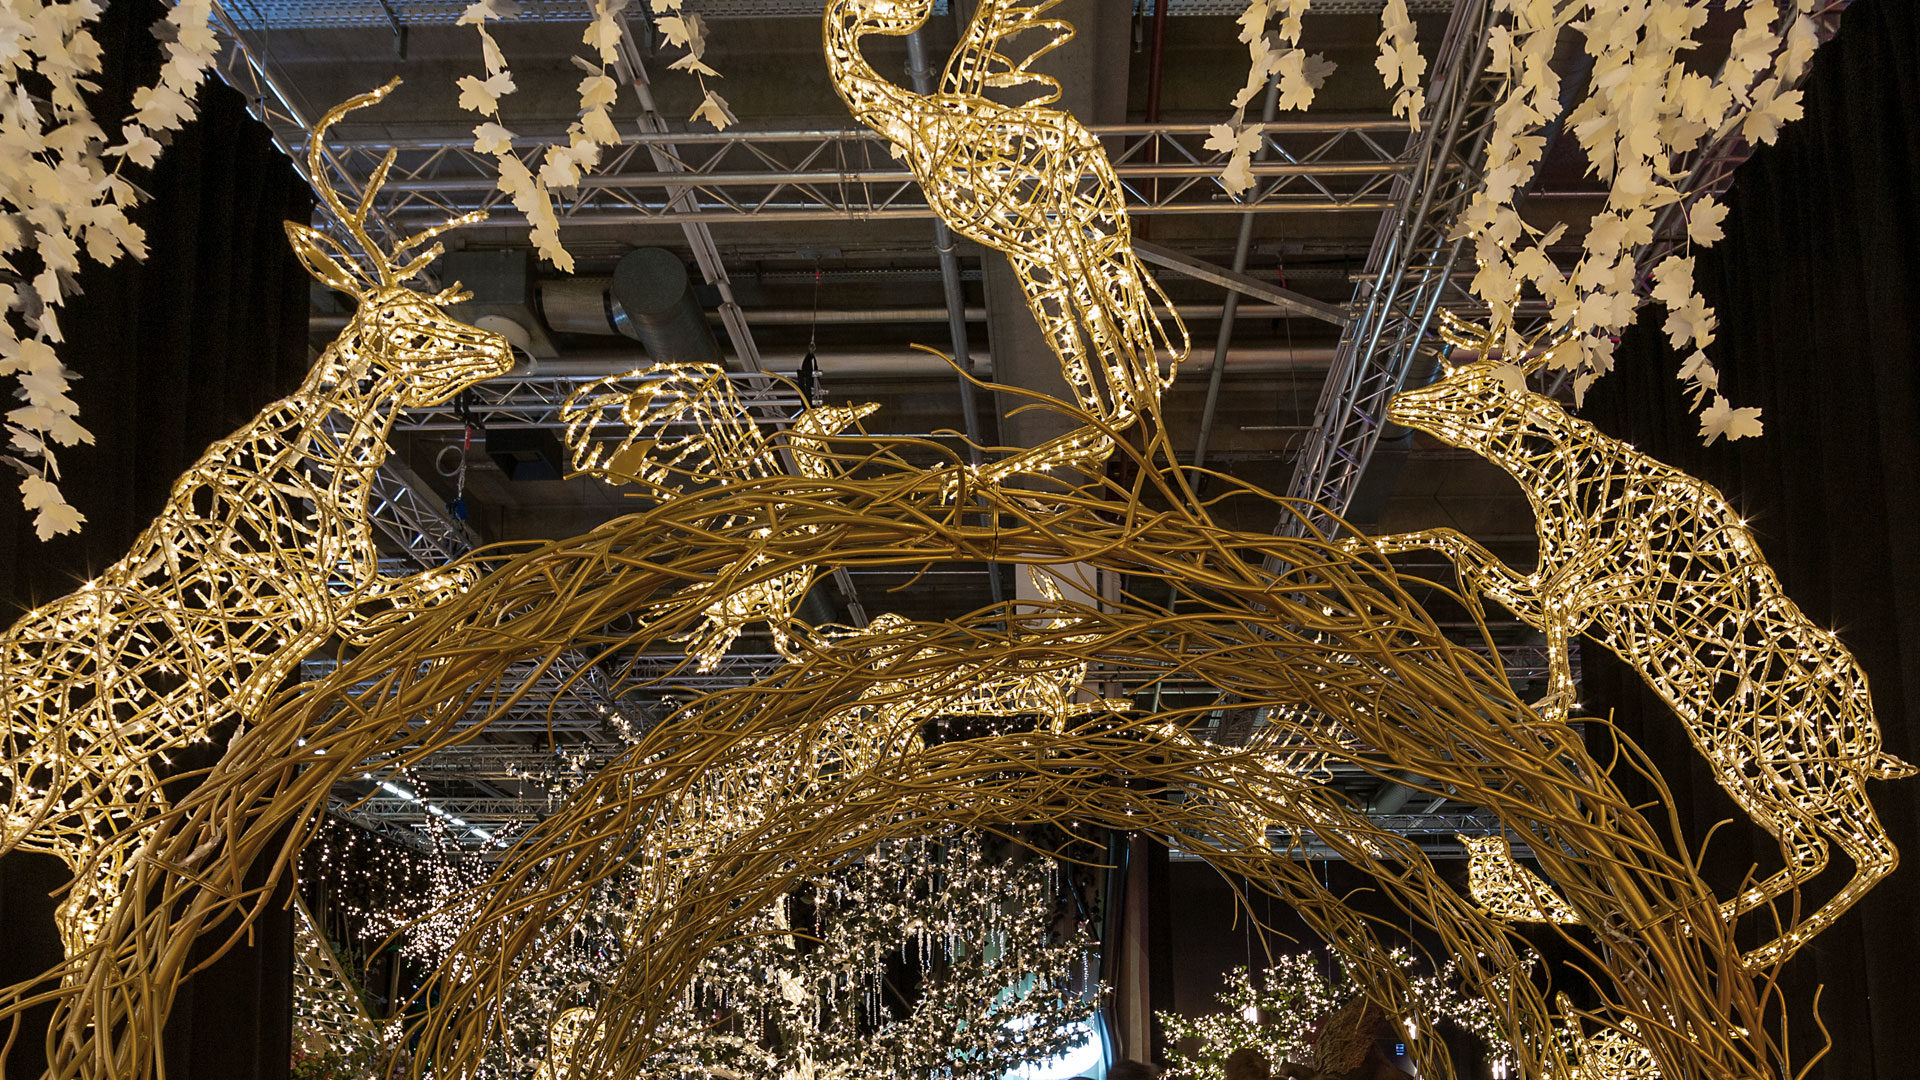 Close up view of "The Arch of Life" light installation with light sculptures of different forest animals at the showroom of MK Illumination Austria in the city of Innsbruck, Austria.